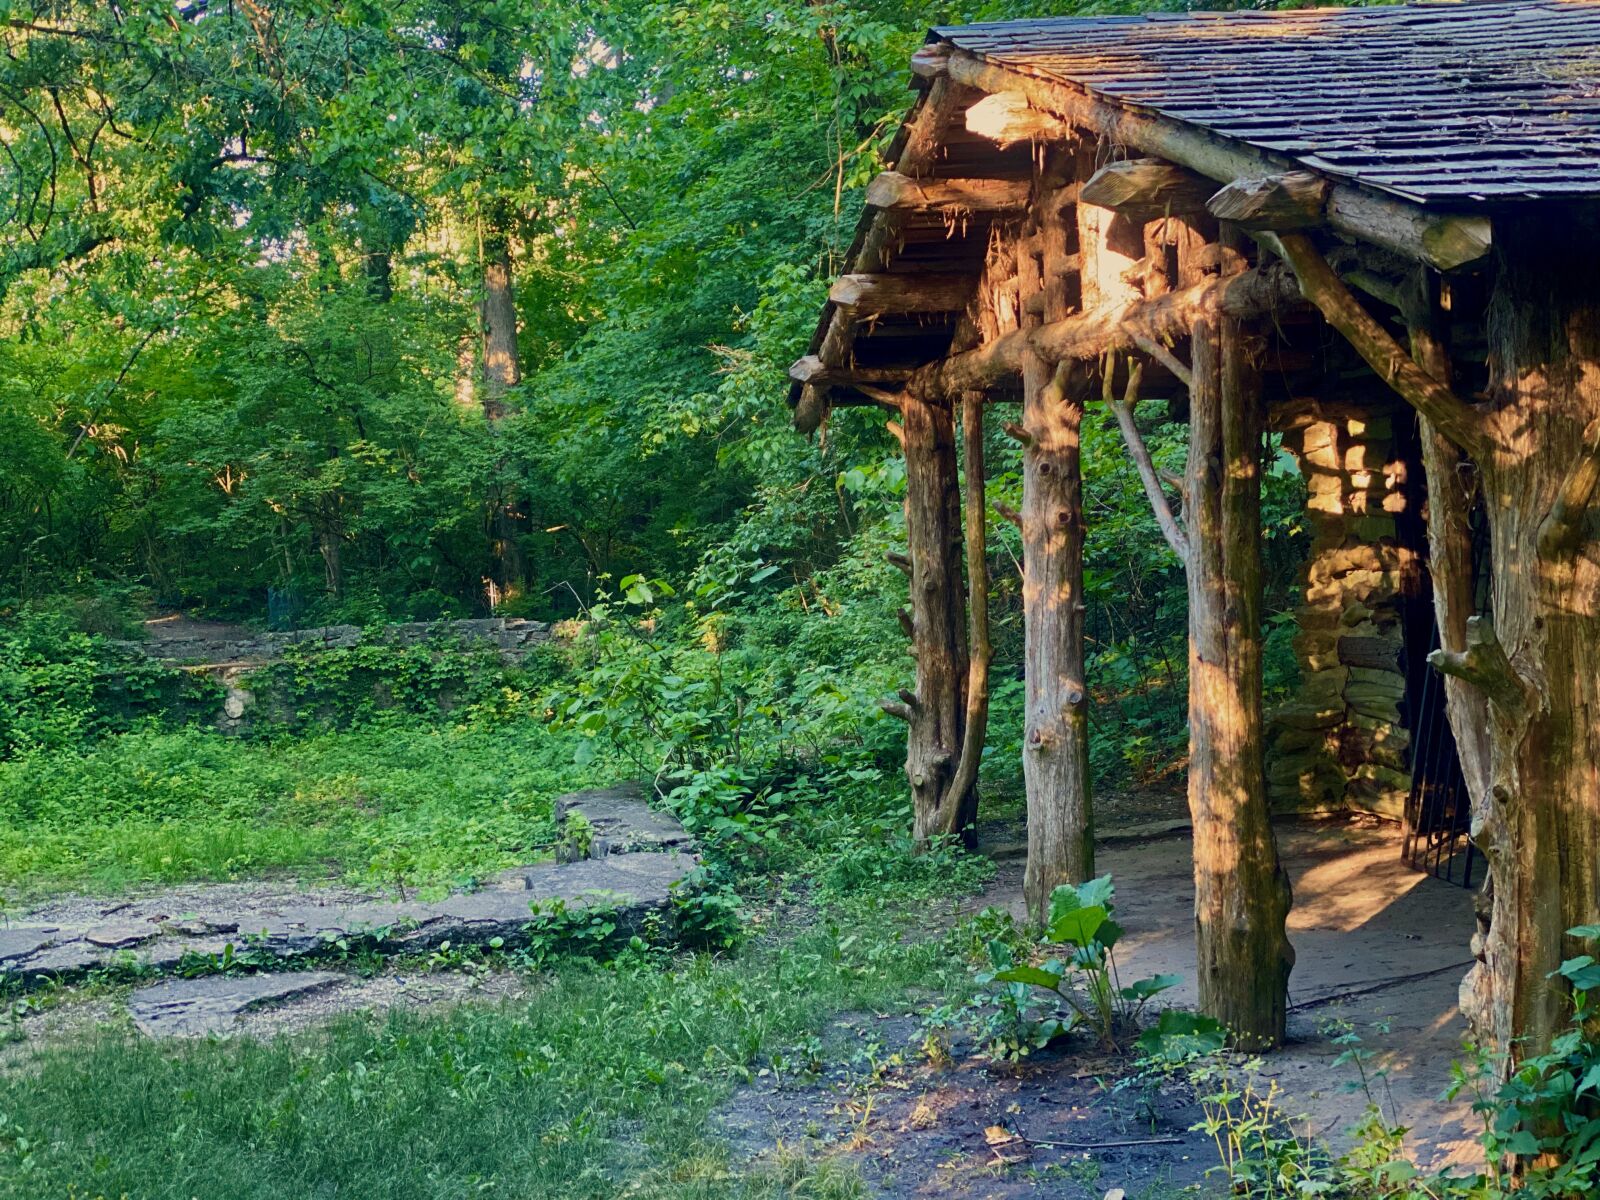 iPhone 11 Pro back dual camera 6mm f/2 sample photo. Cabin ruins in woods photography